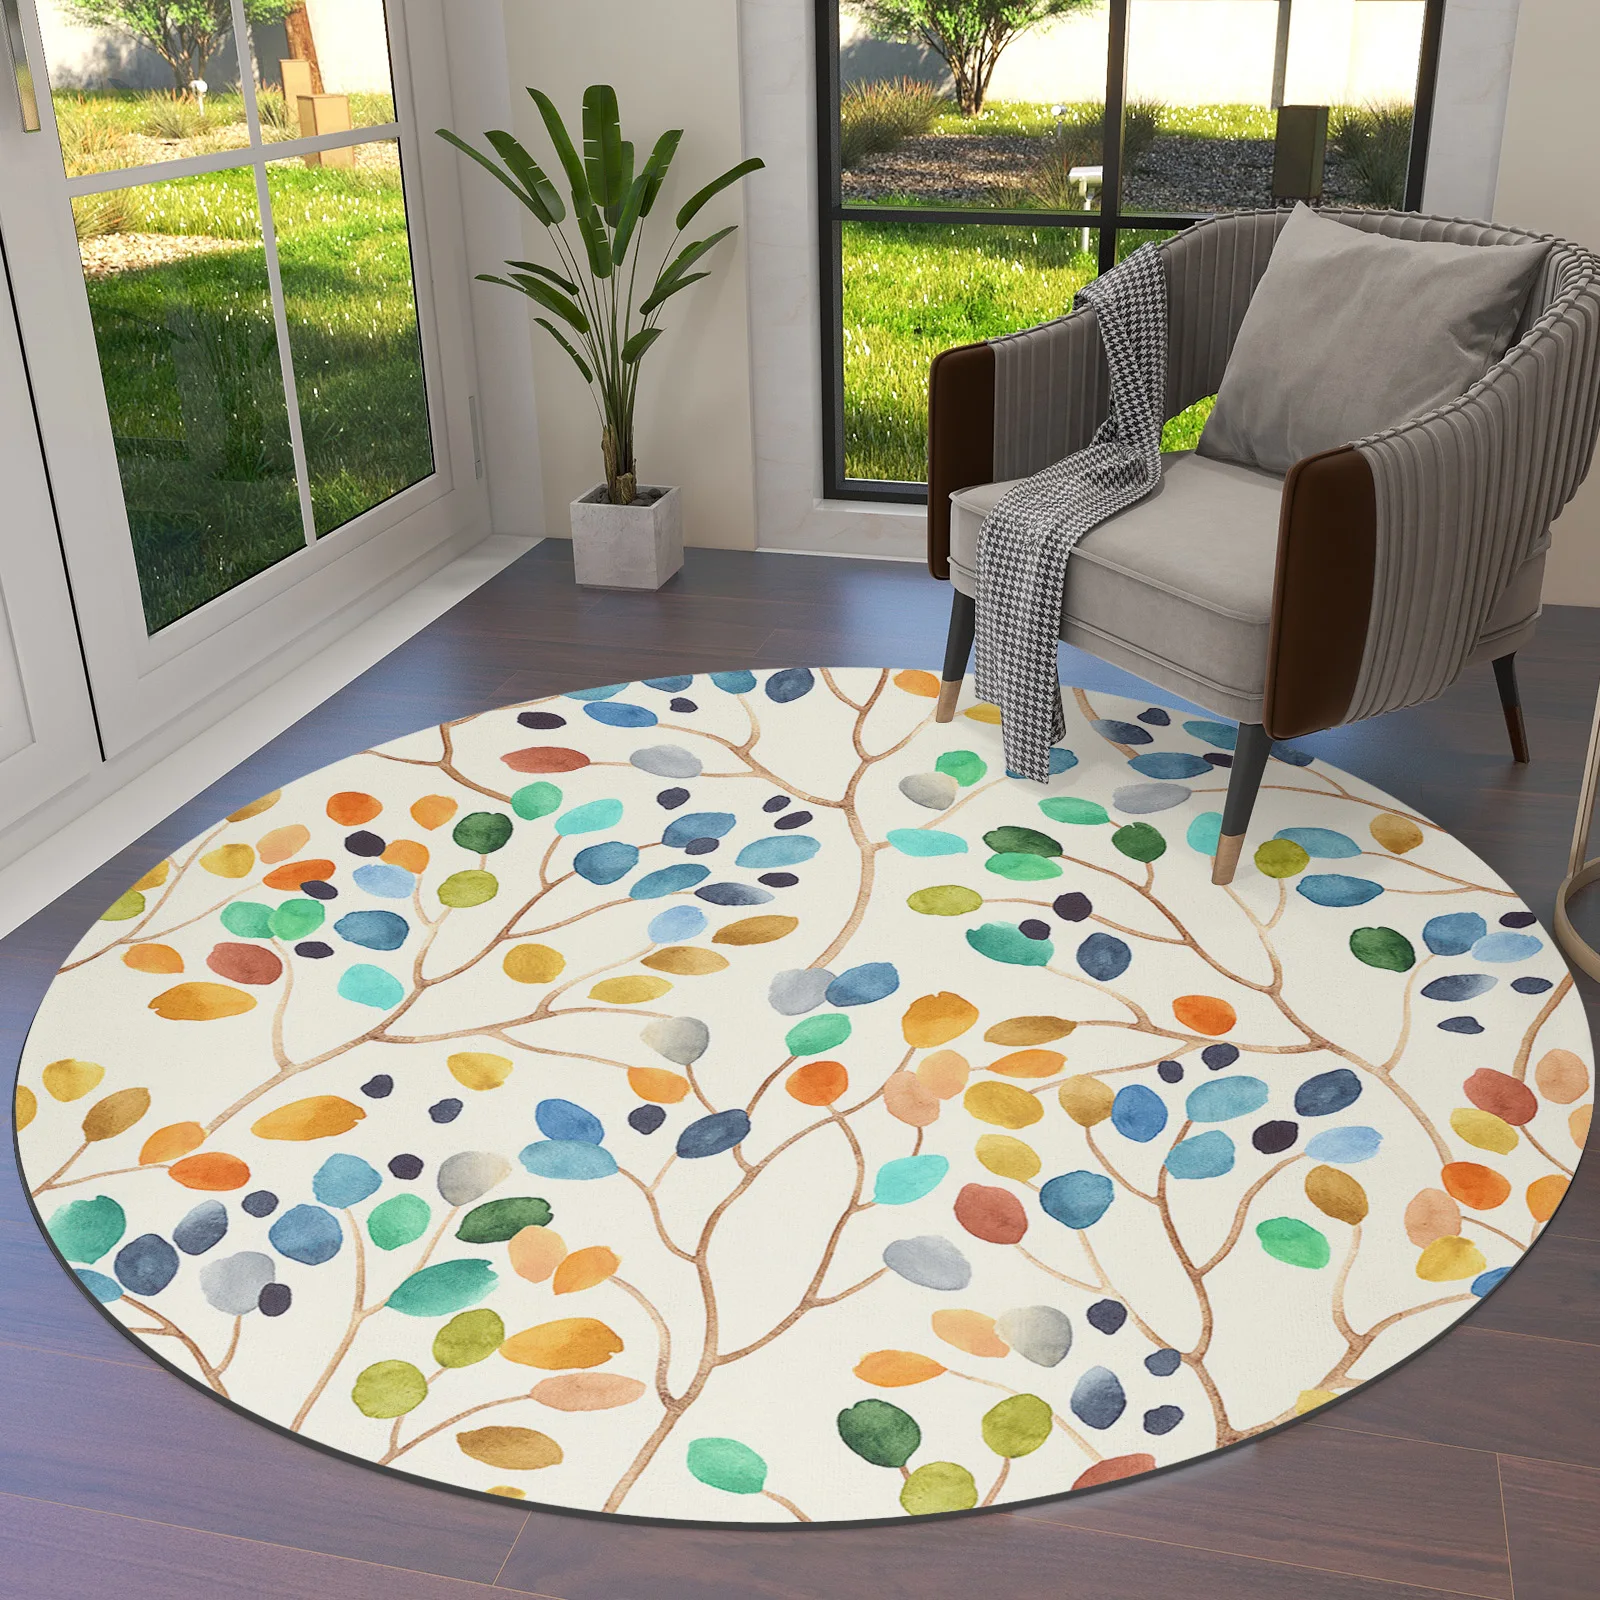 

Abstract Watercolor Leaves Spotted Branches Round Area Rug Carpets for Living Room Large Mat Home Bedroom Kid Room Decoration